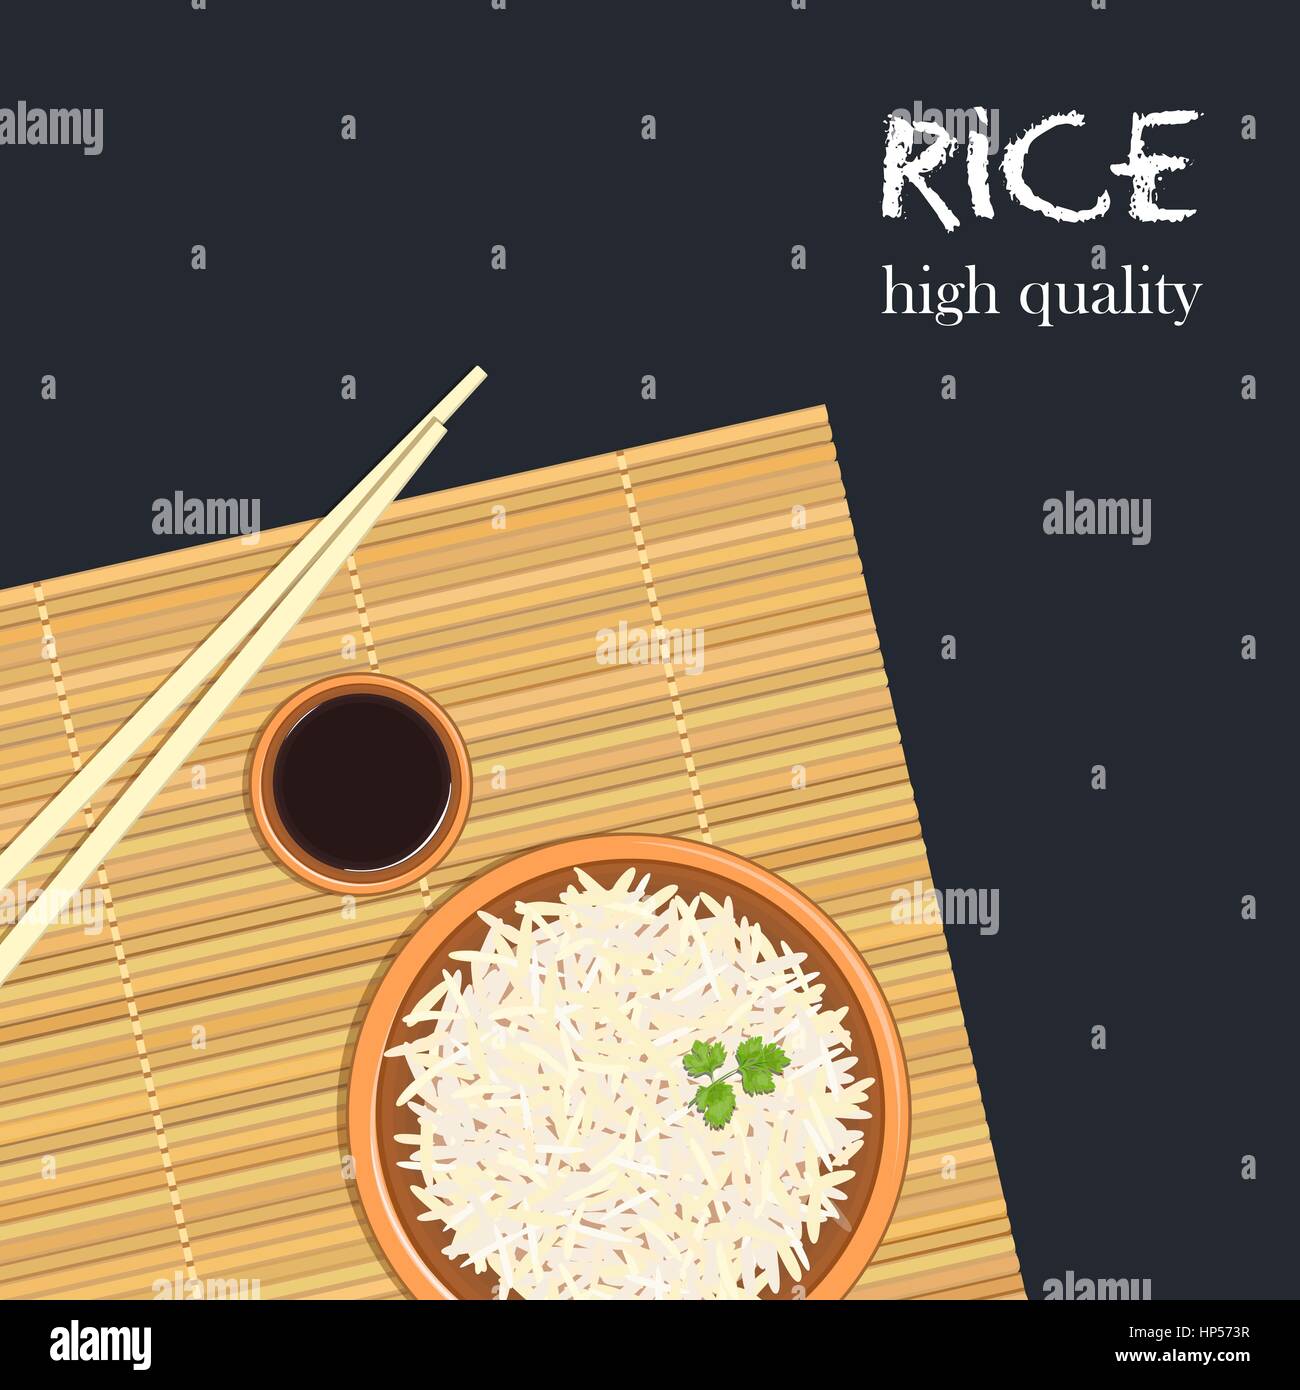 Rice in ceramic bowl with chopsticks. Kitchen bamboo mat, sauce tureen. Text high quality. Vector illustration. For culinary, cafe, fastfood, shop, re Stock Vector